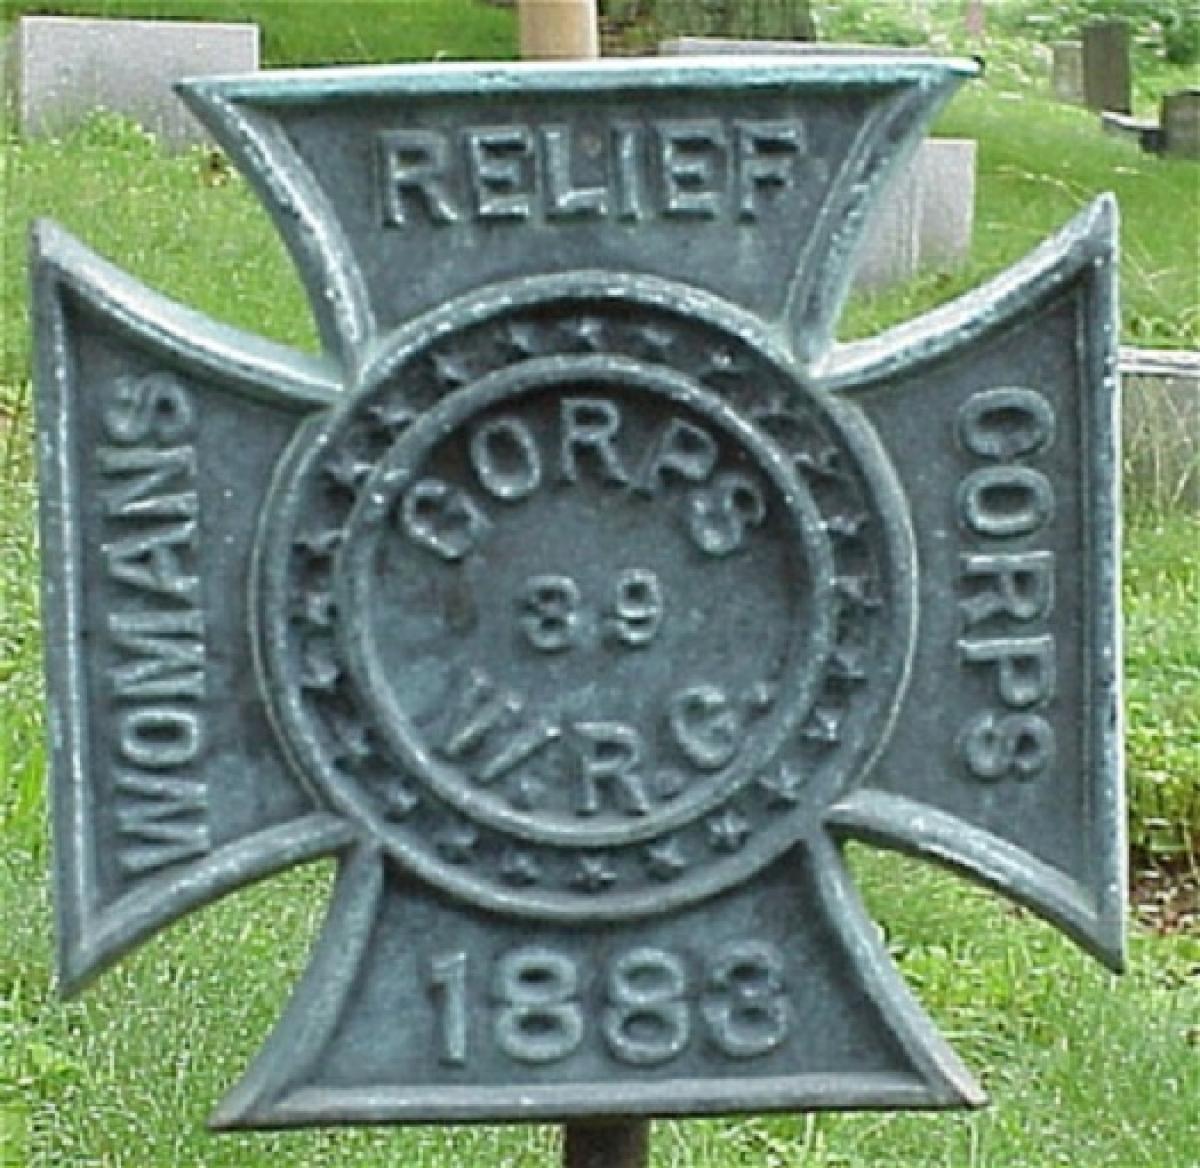 OK, Grove, Headstone Symbols and Meanings, Women's Relief Corps